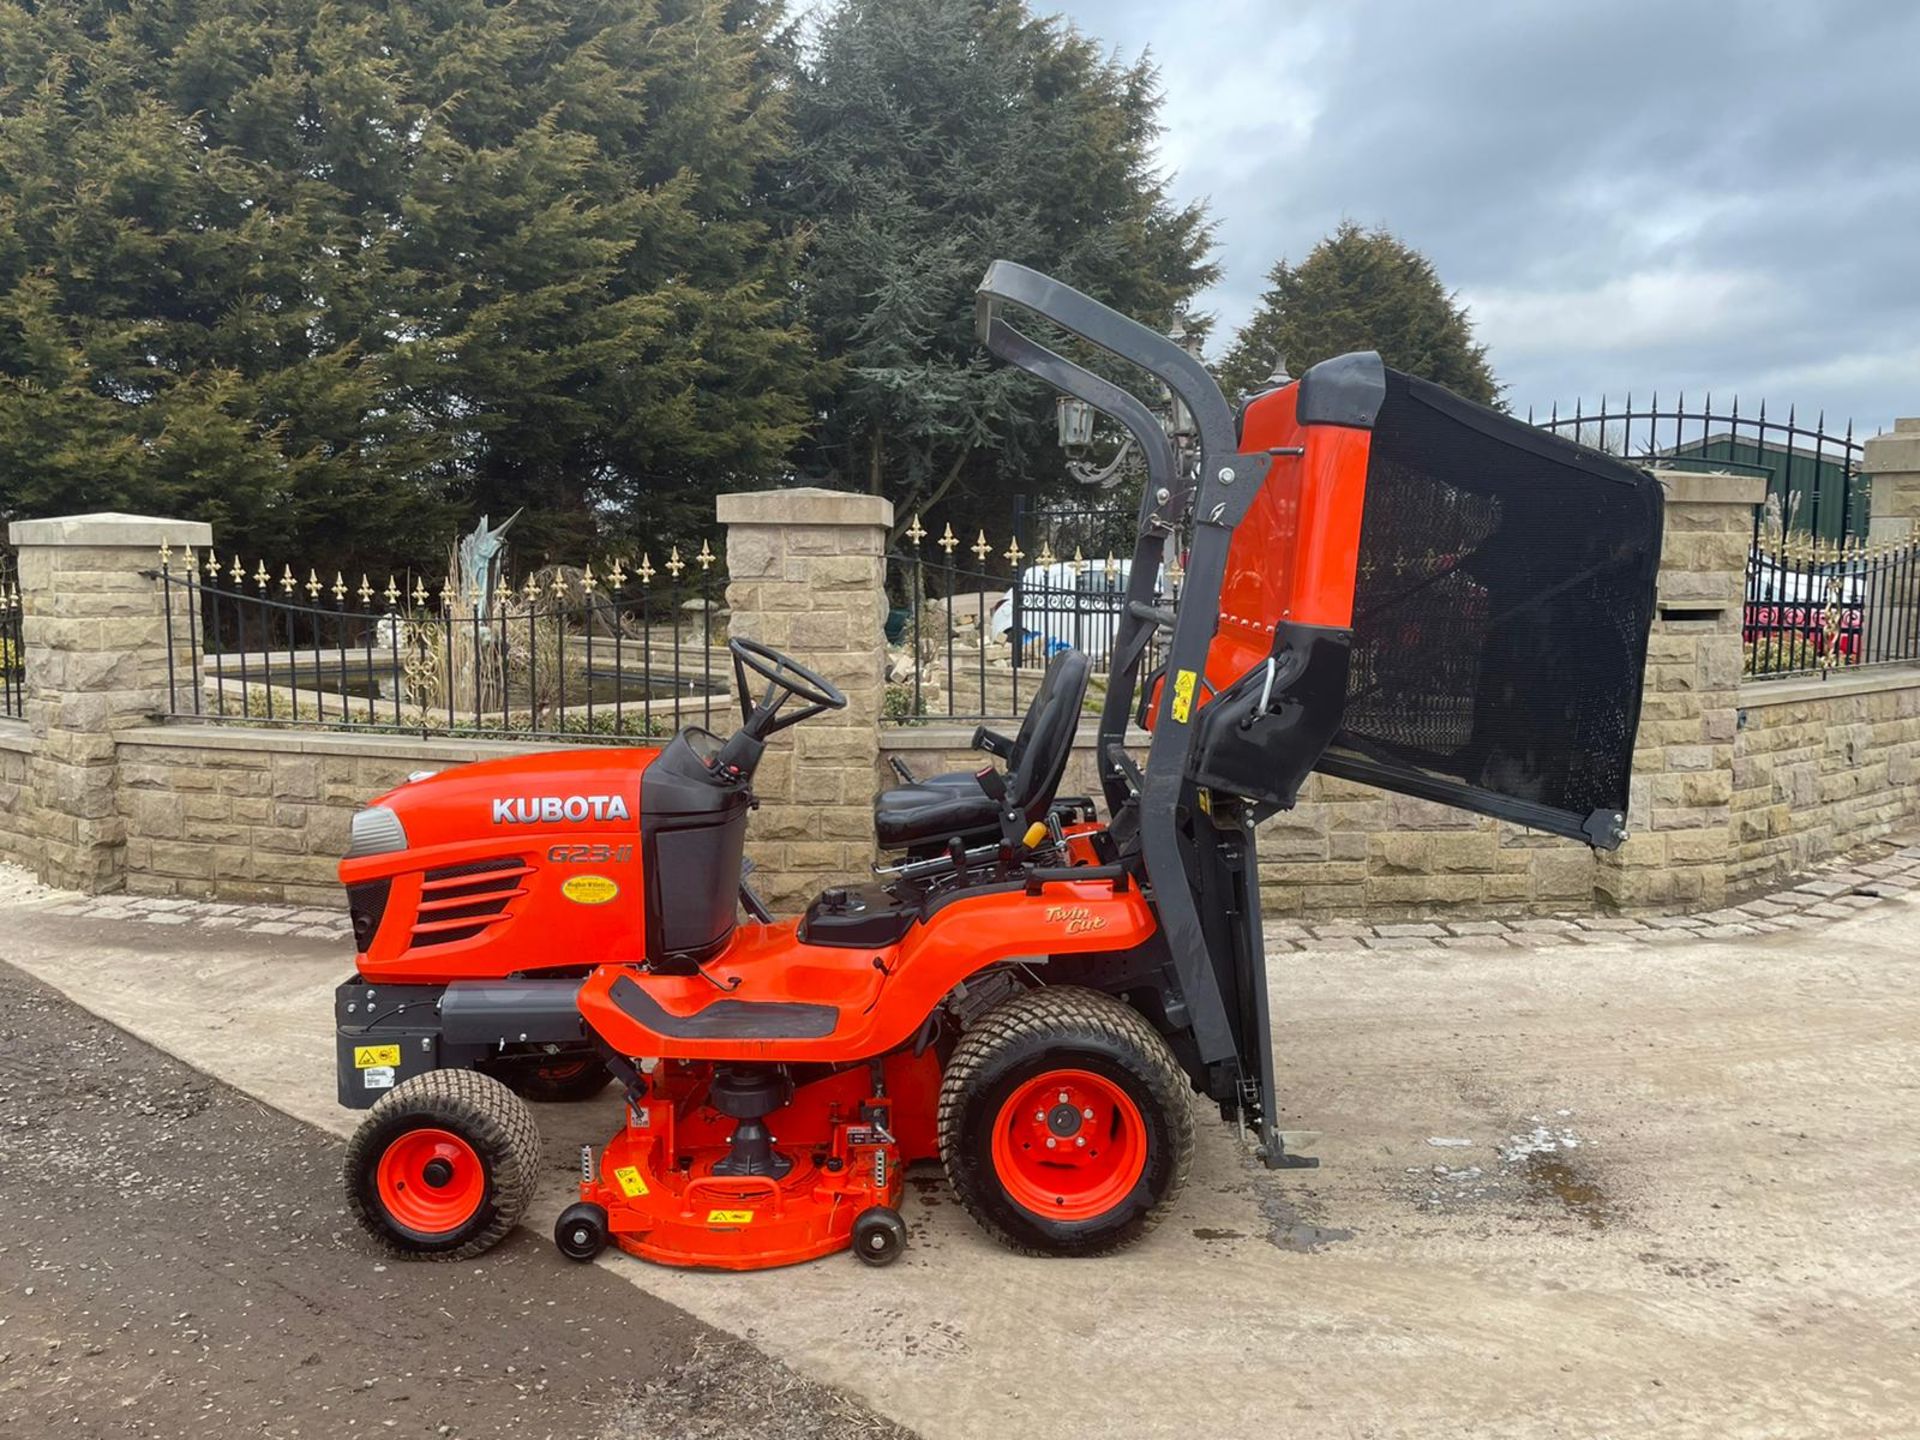 2015 KUBOTA G23-II RIDE ON MOWER, RUNS, DRIVES AND CUTS, IN MINT CONDITION, LOW 205 HOURS FROM NEW! - Image 5 of 8